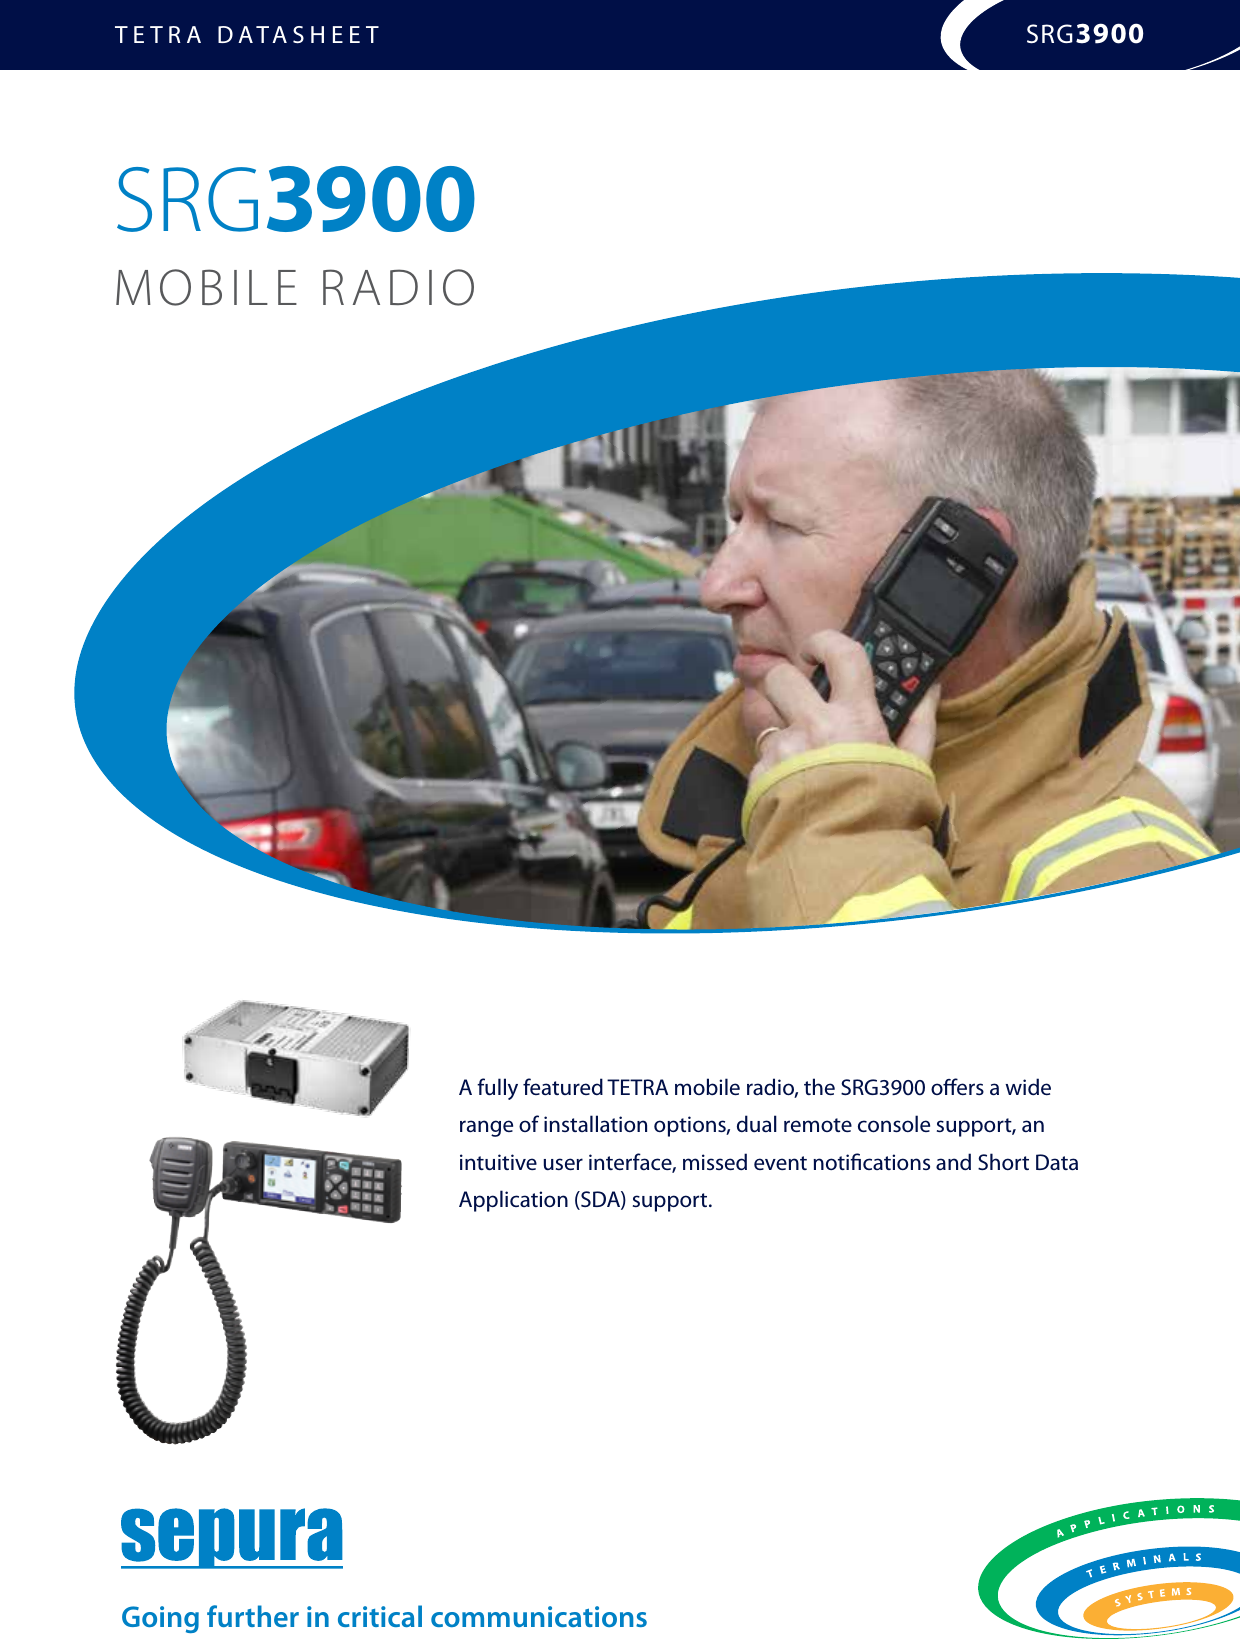 TETRA DATASHEET SRG3900A fully featured TETRA mobile radio, the SRG3900 oﬀers a wide range of installation options, dual remote console support, an intuitive user interface, missed event notiﬁcations and Short Data Application (SDA) support. Going further in critical communicationsSRG3900MOBILE RADIO